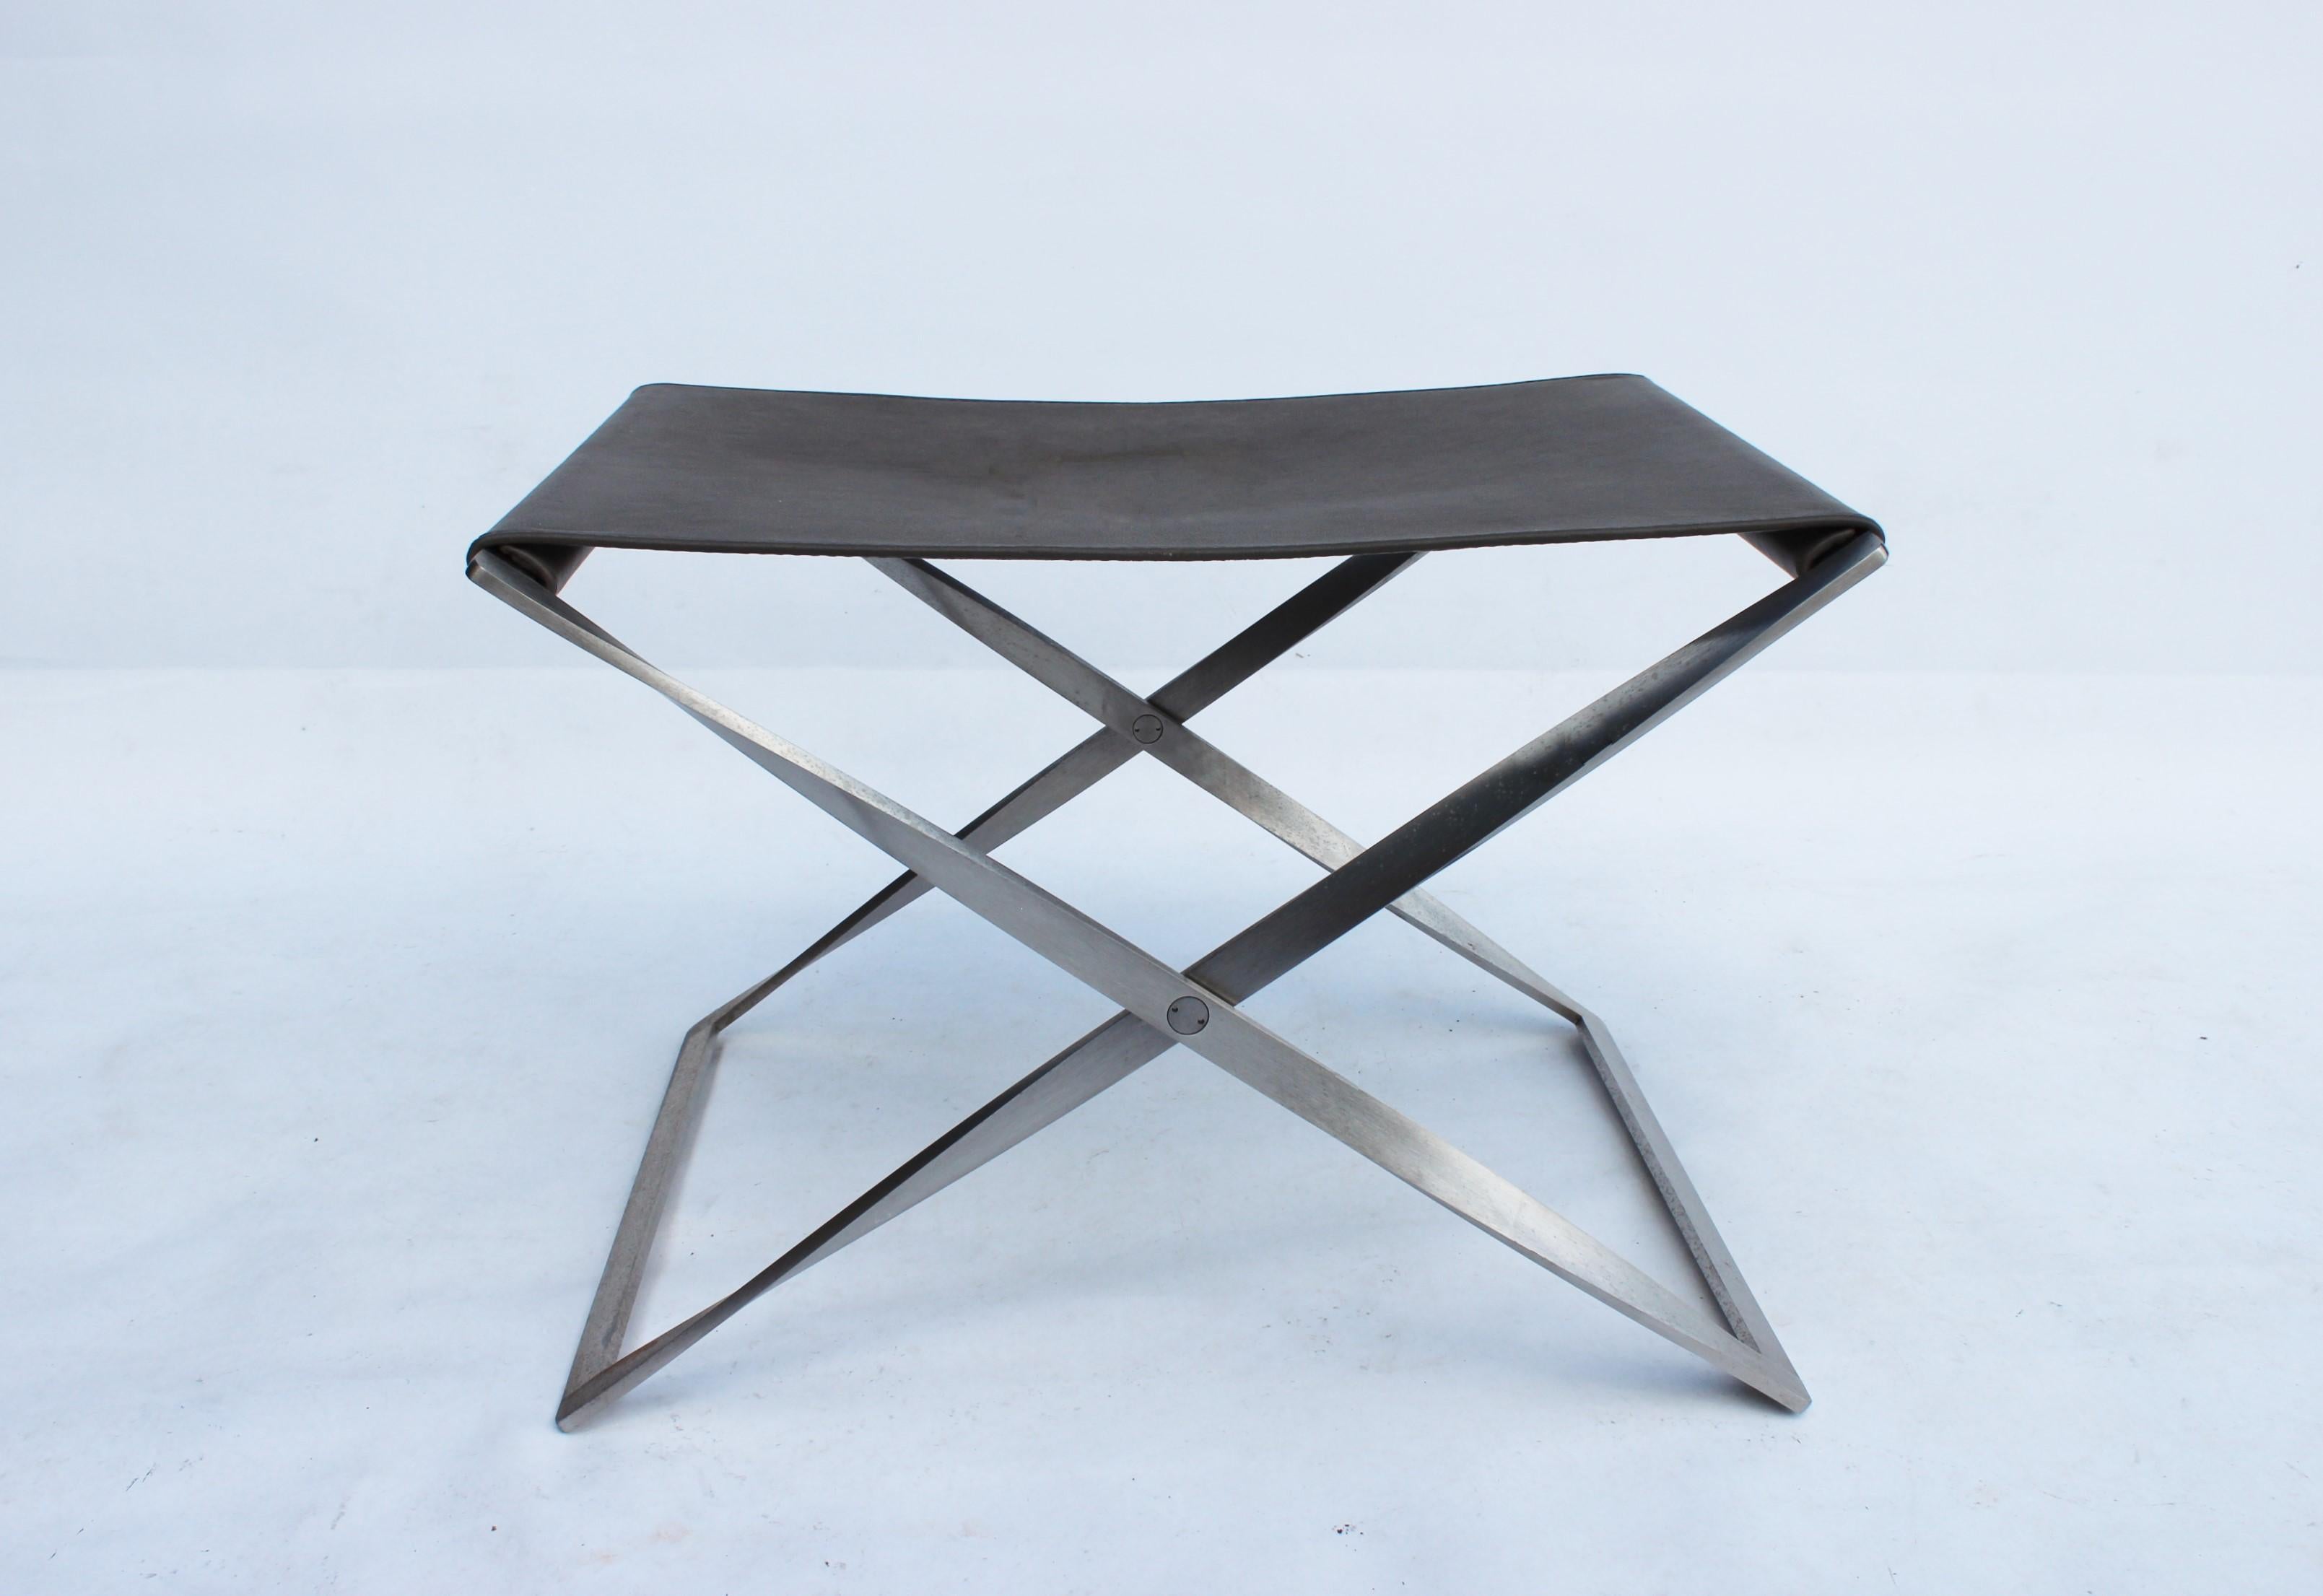 Folding stool, model PK91, designed by Poul Kjærholm in 1961 and manufactured by Fritz Hansen in 2019. The stool is with original upholstery in grey leather and frame of steel.